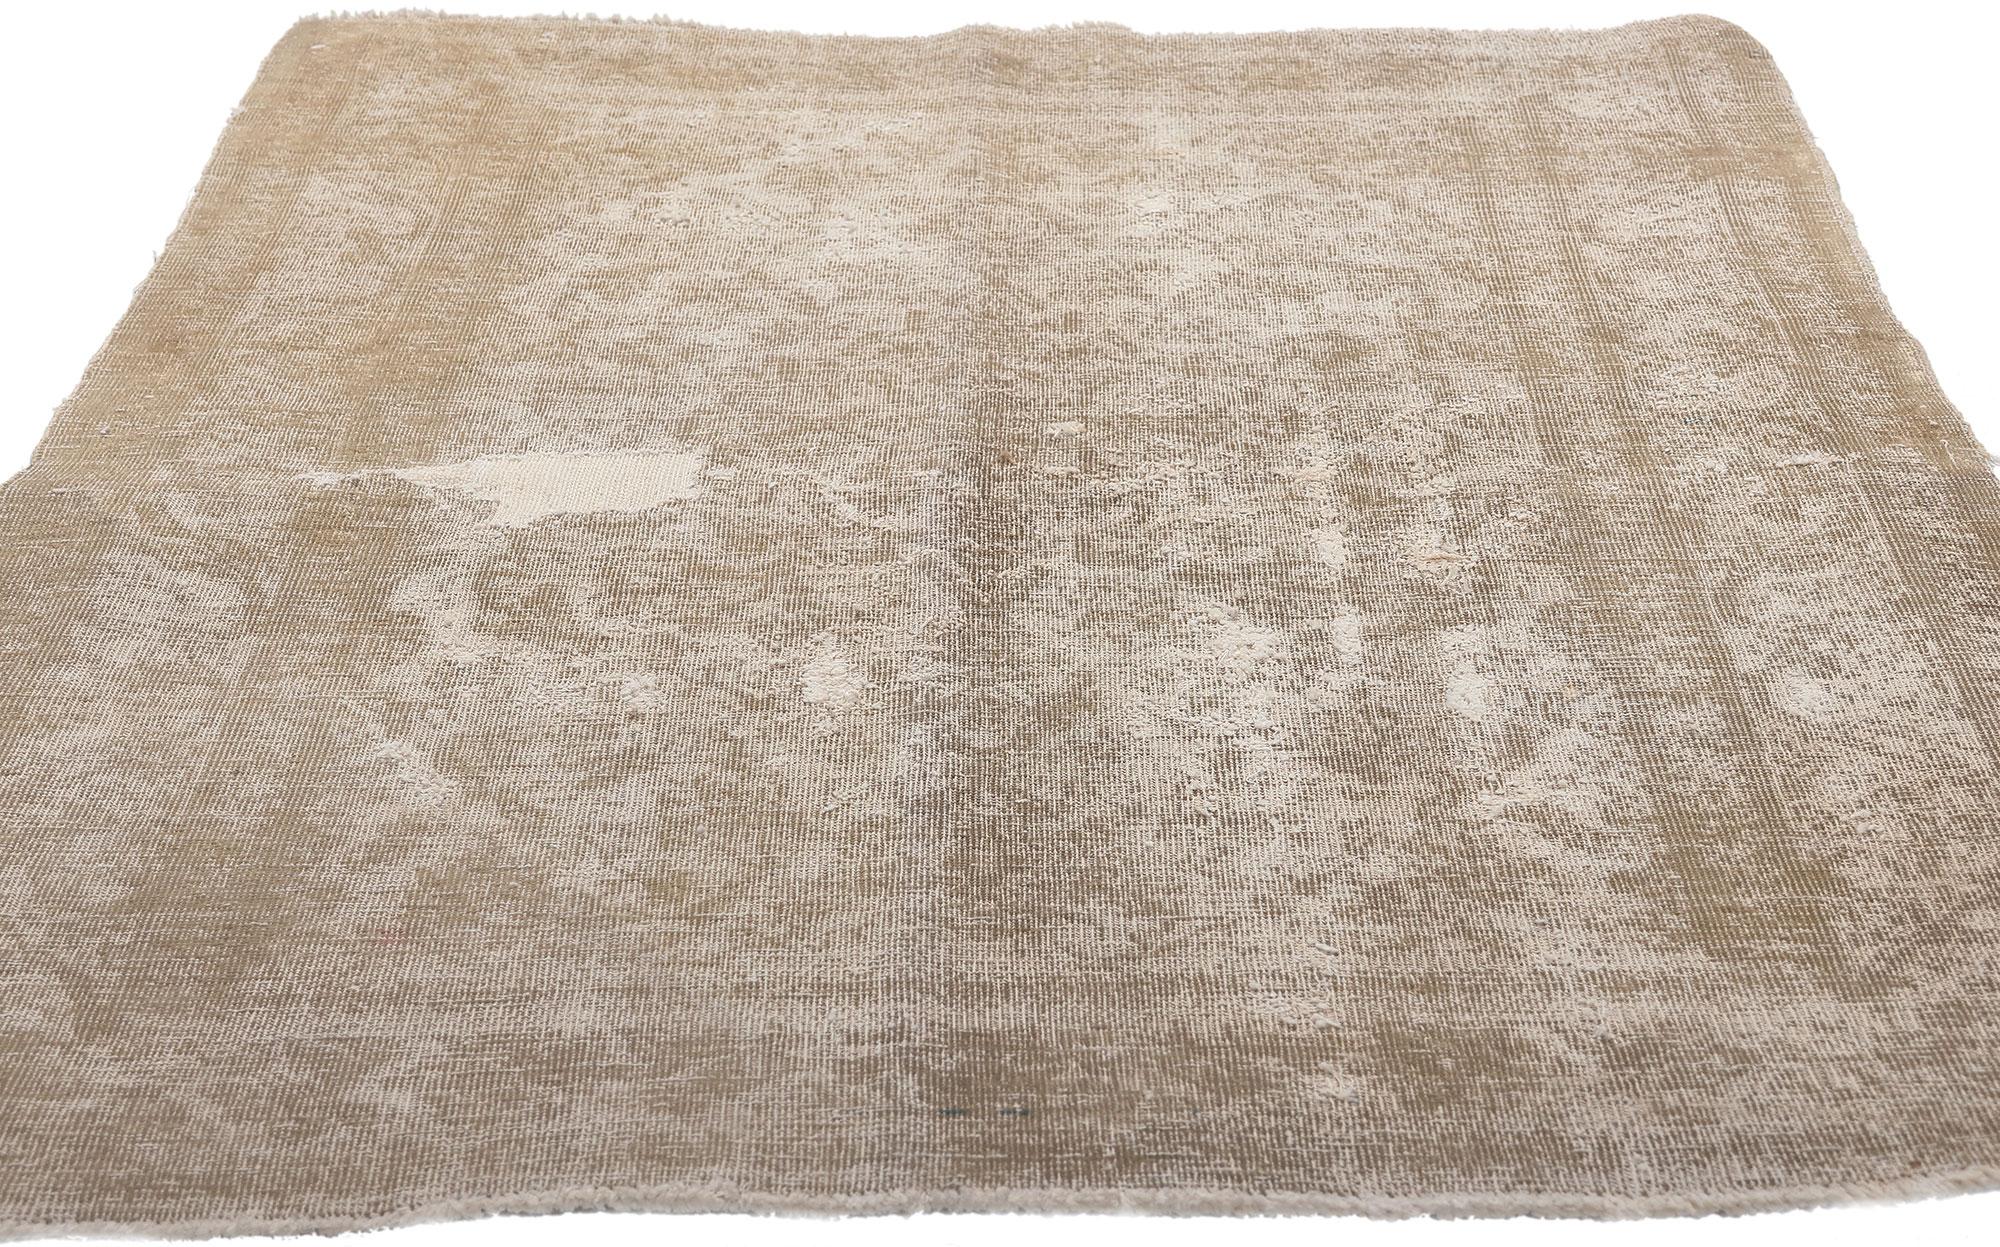 Kashan Distressed Faded Vintage Persian Rug, Earth-Tone Elegance Meets Modern Luxe For Sale